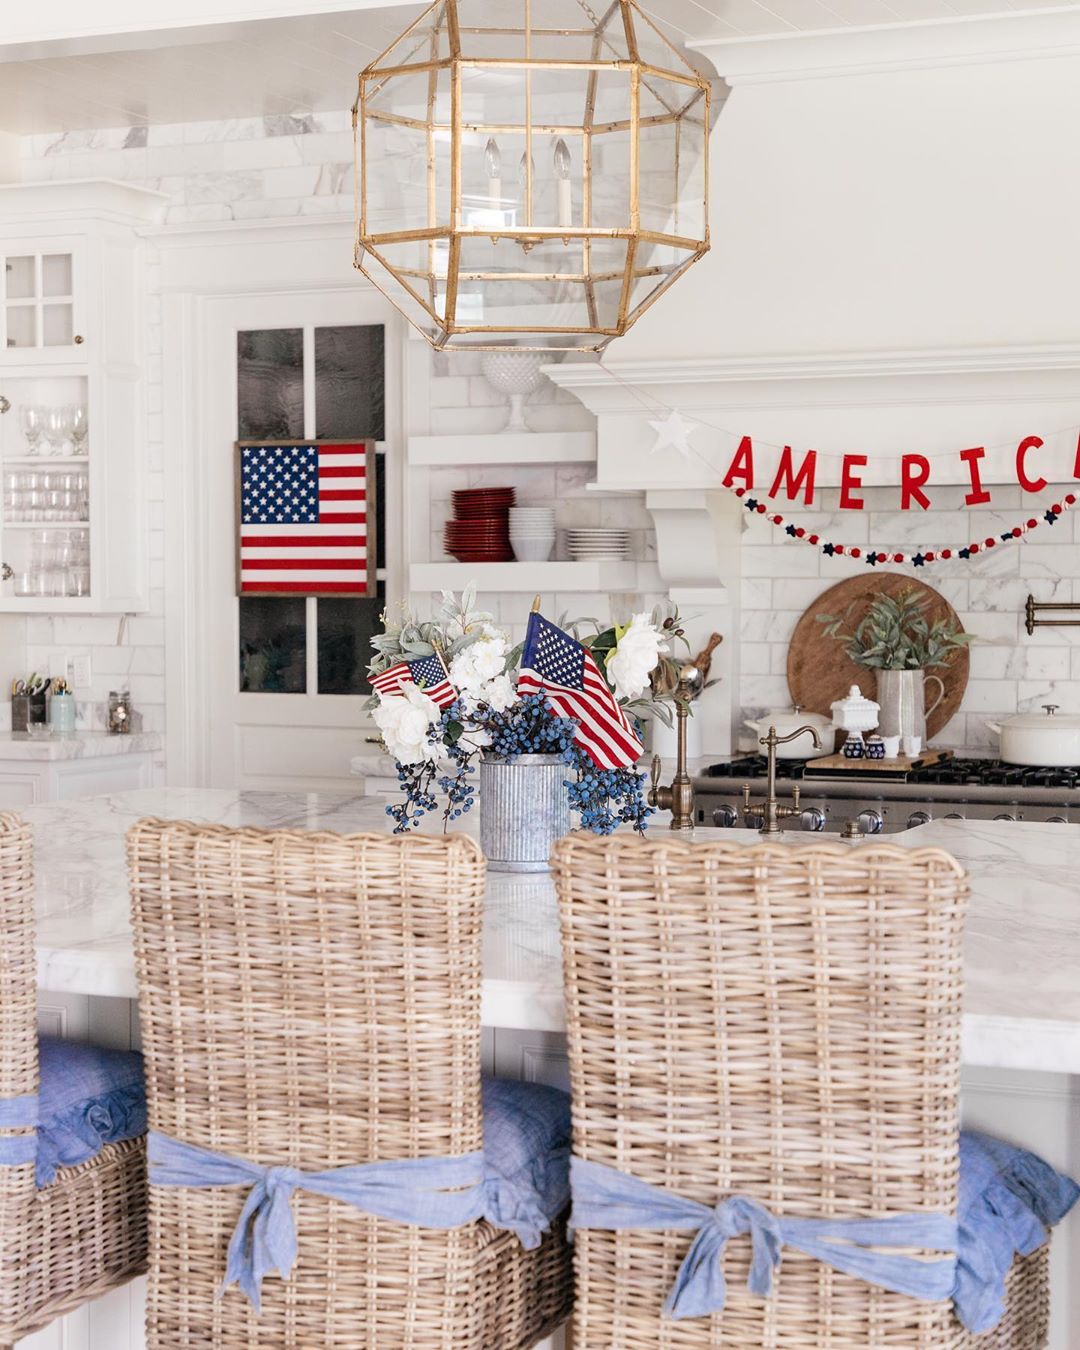 Home Kitchen Decorated with Fourth of July Decor. Photo by Instagram user @homewithhollyj